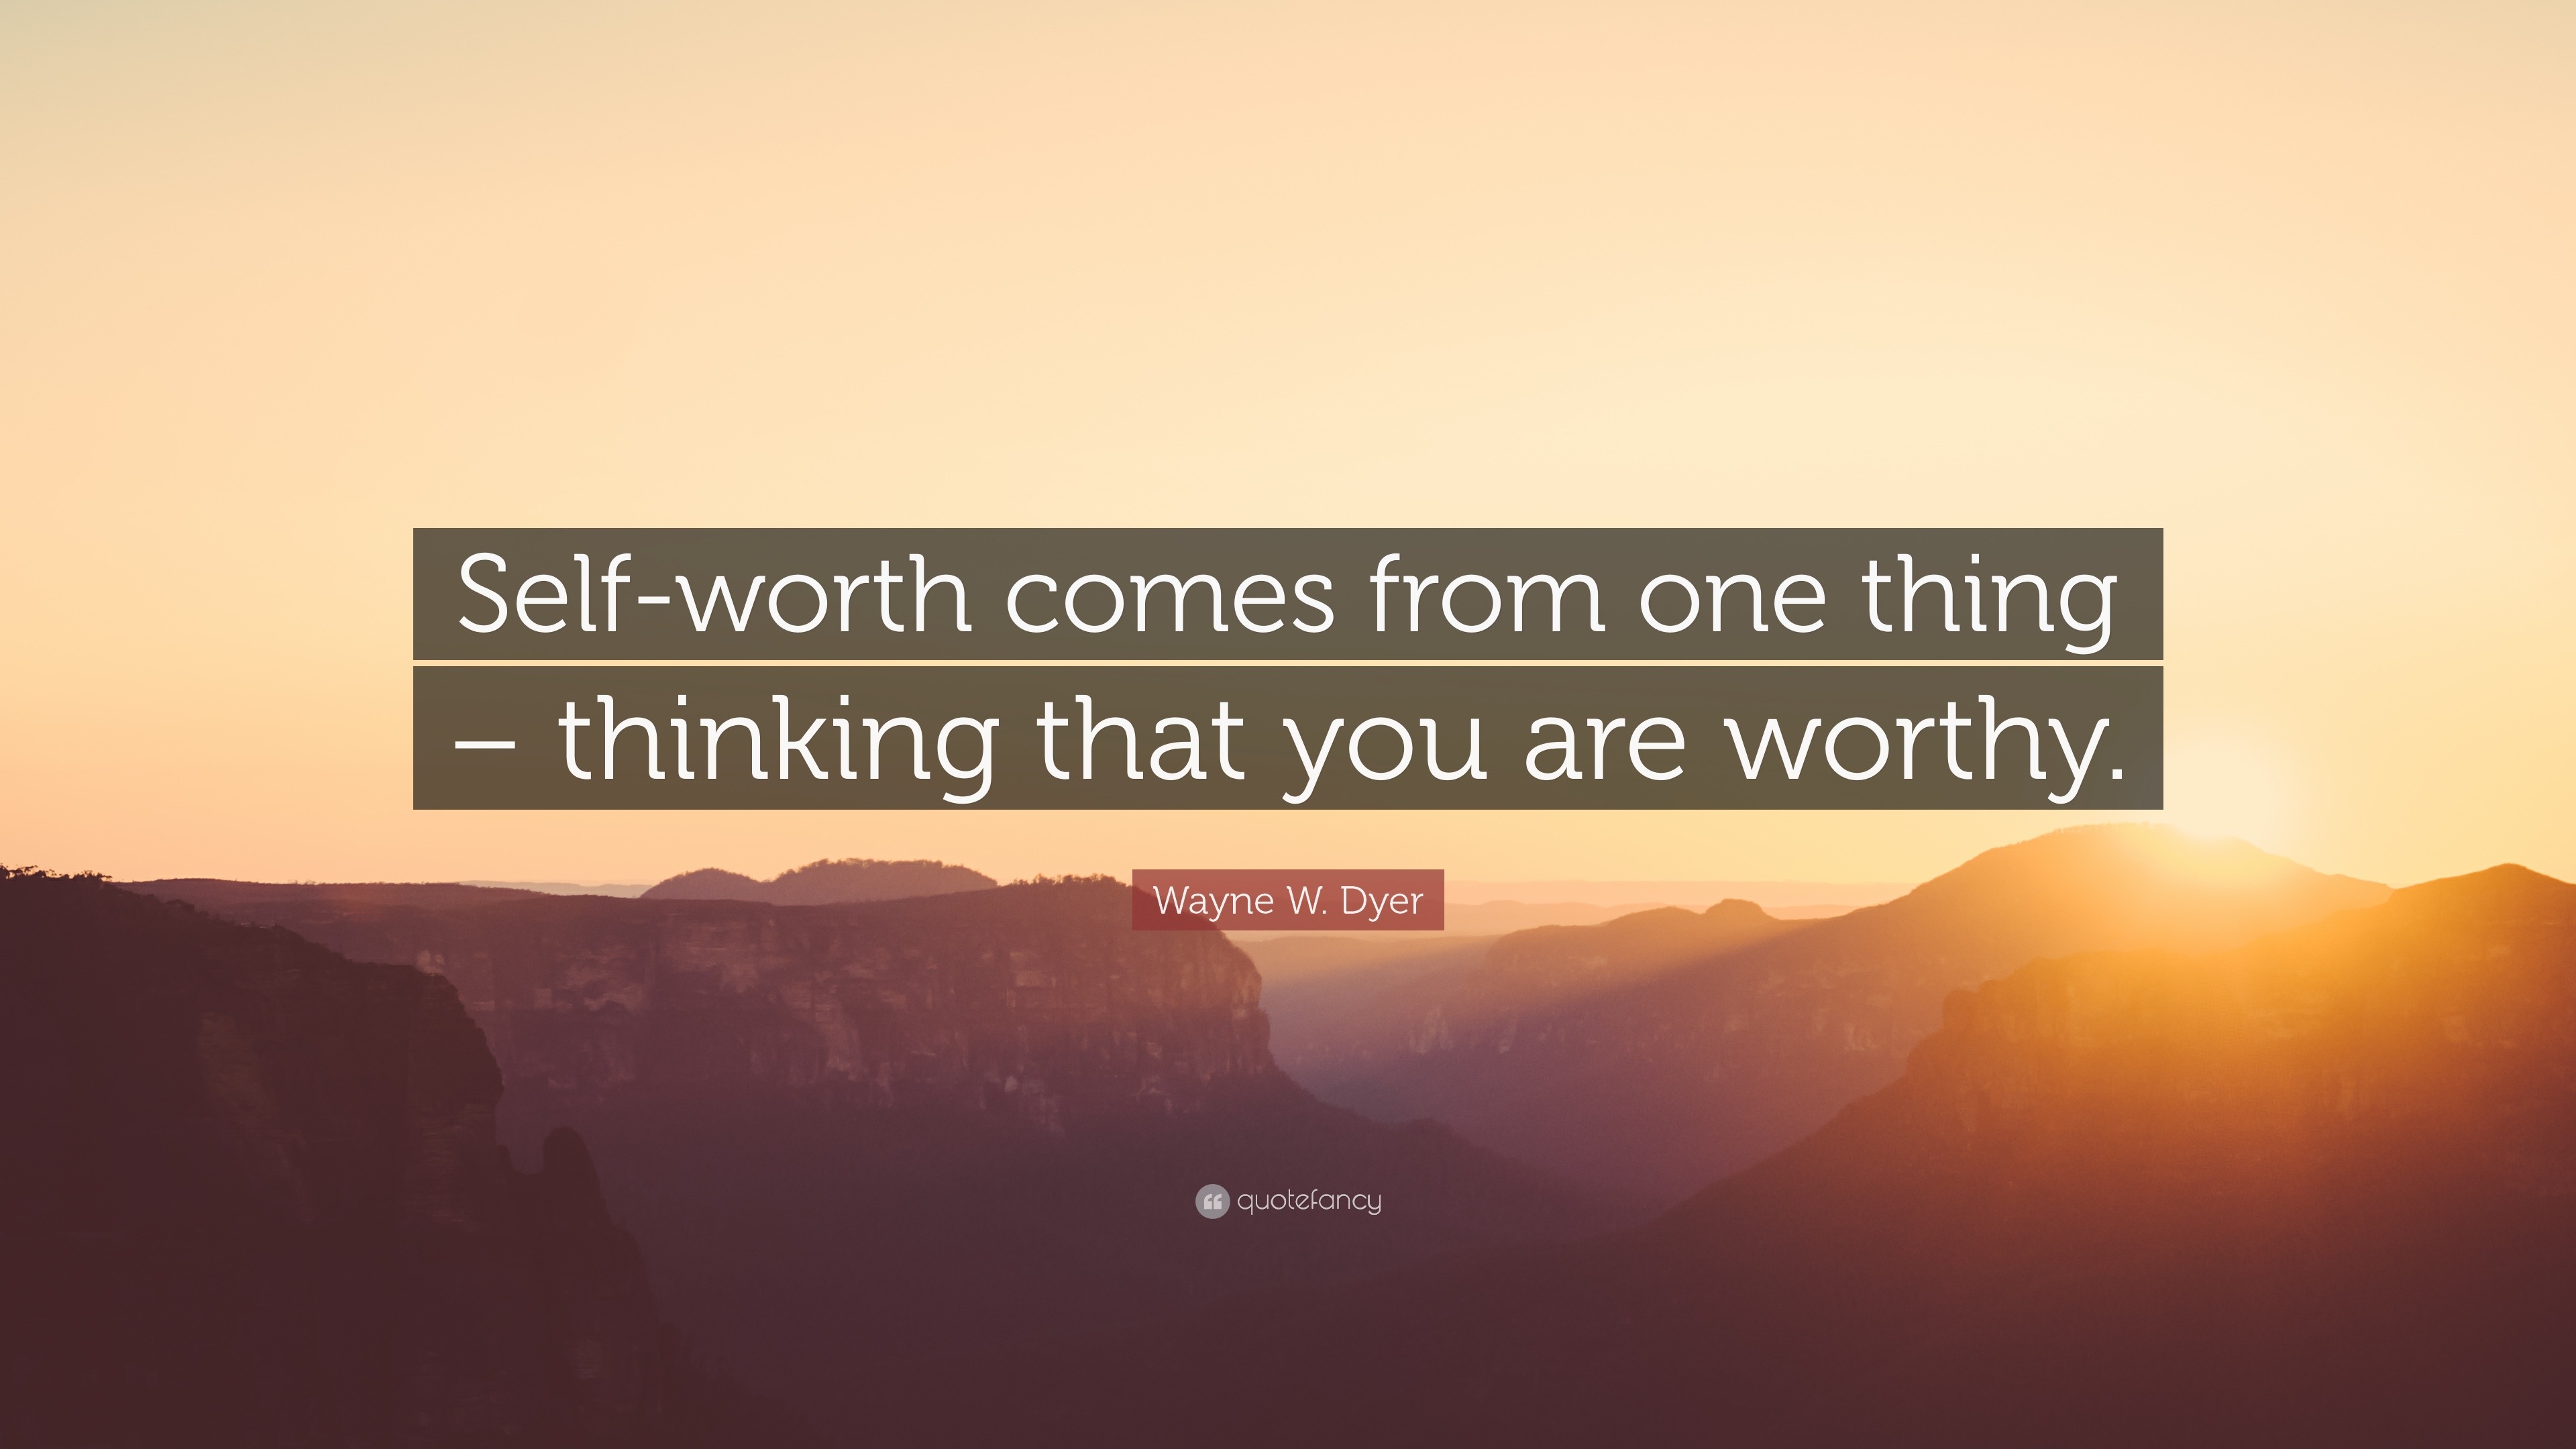 Wayne W. Dyer Quote: "Self-worth comes from one thing ...